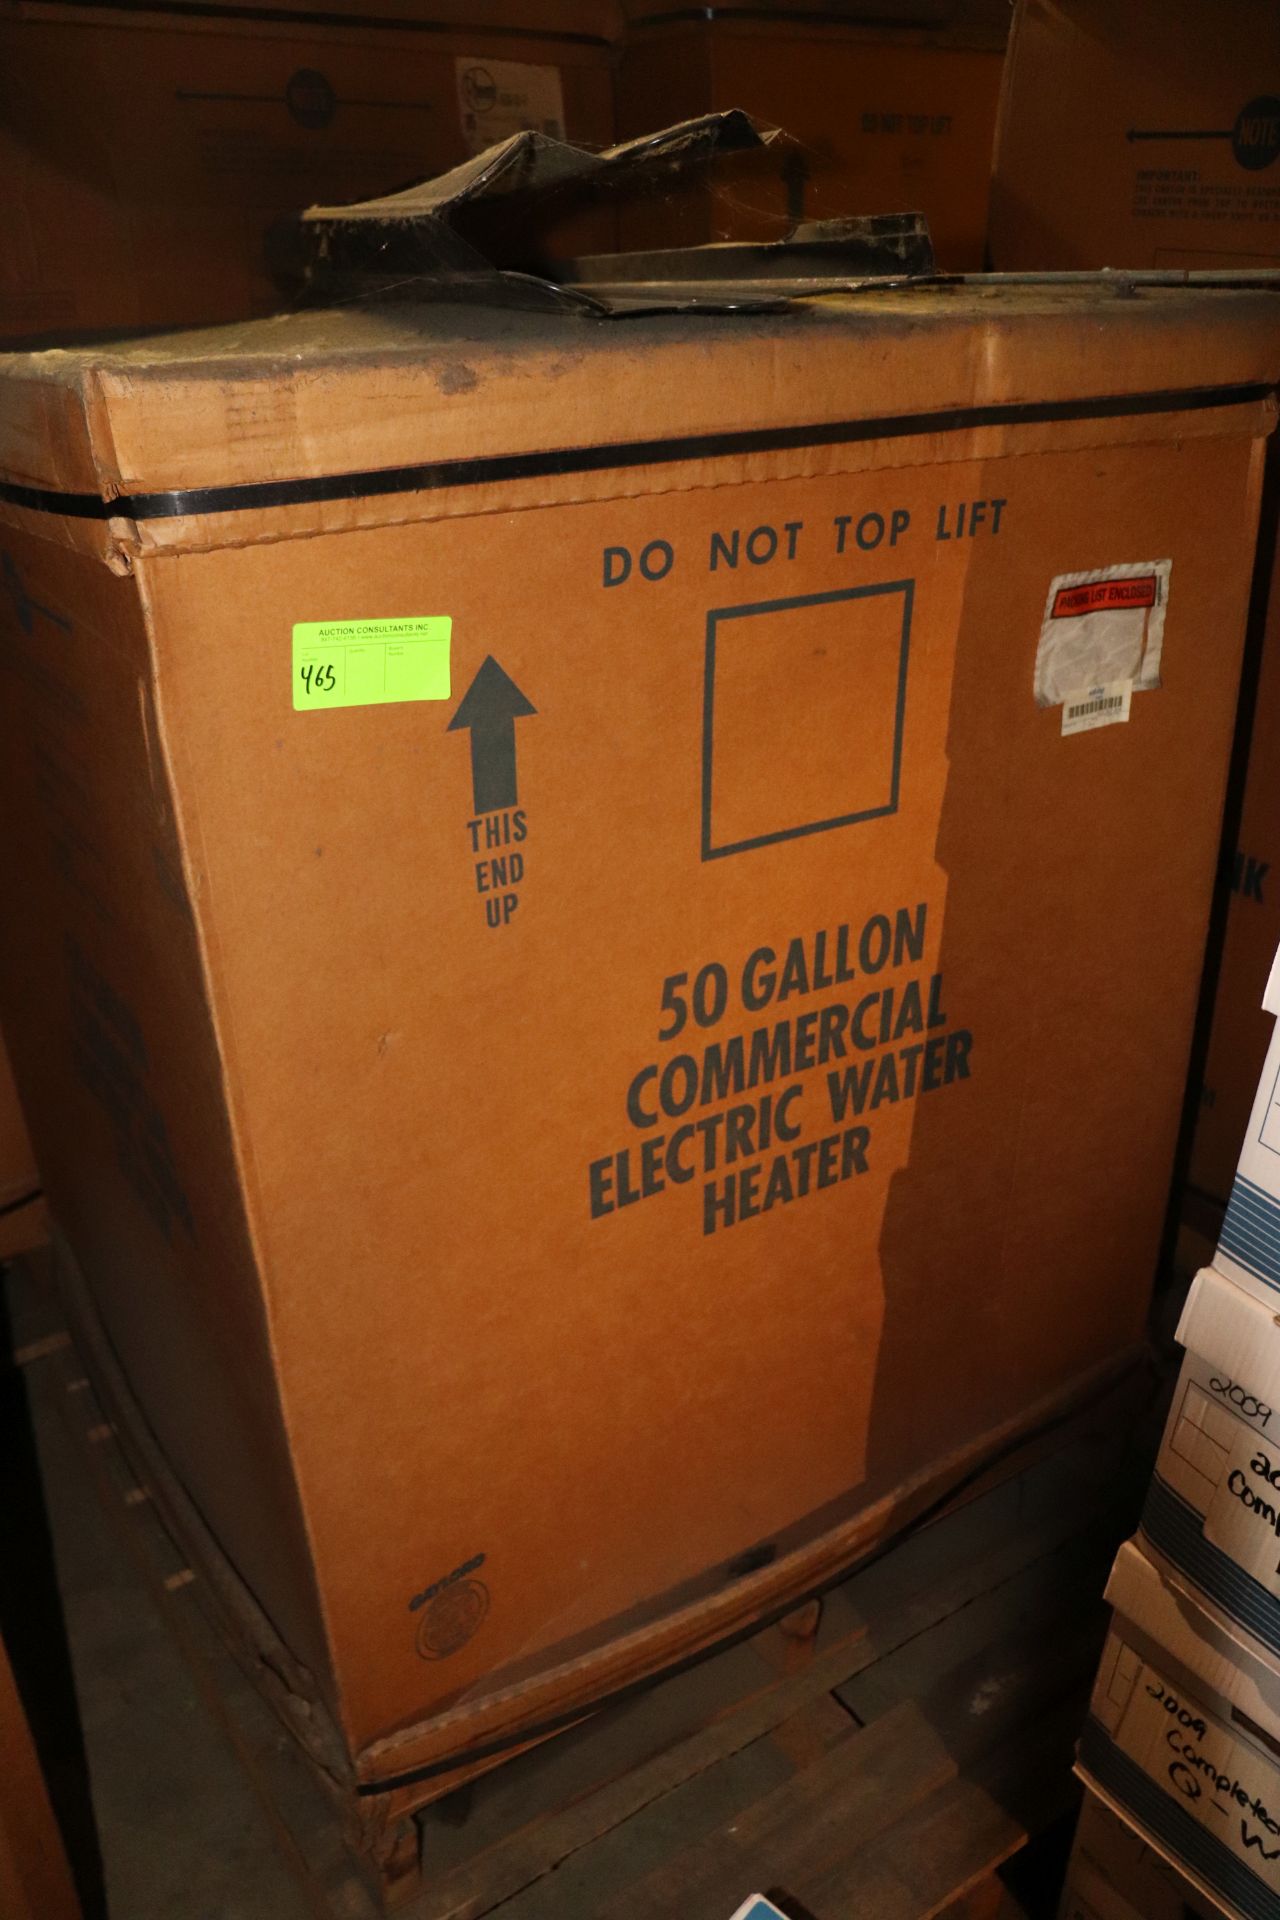 50 gallon commerical electric water heater